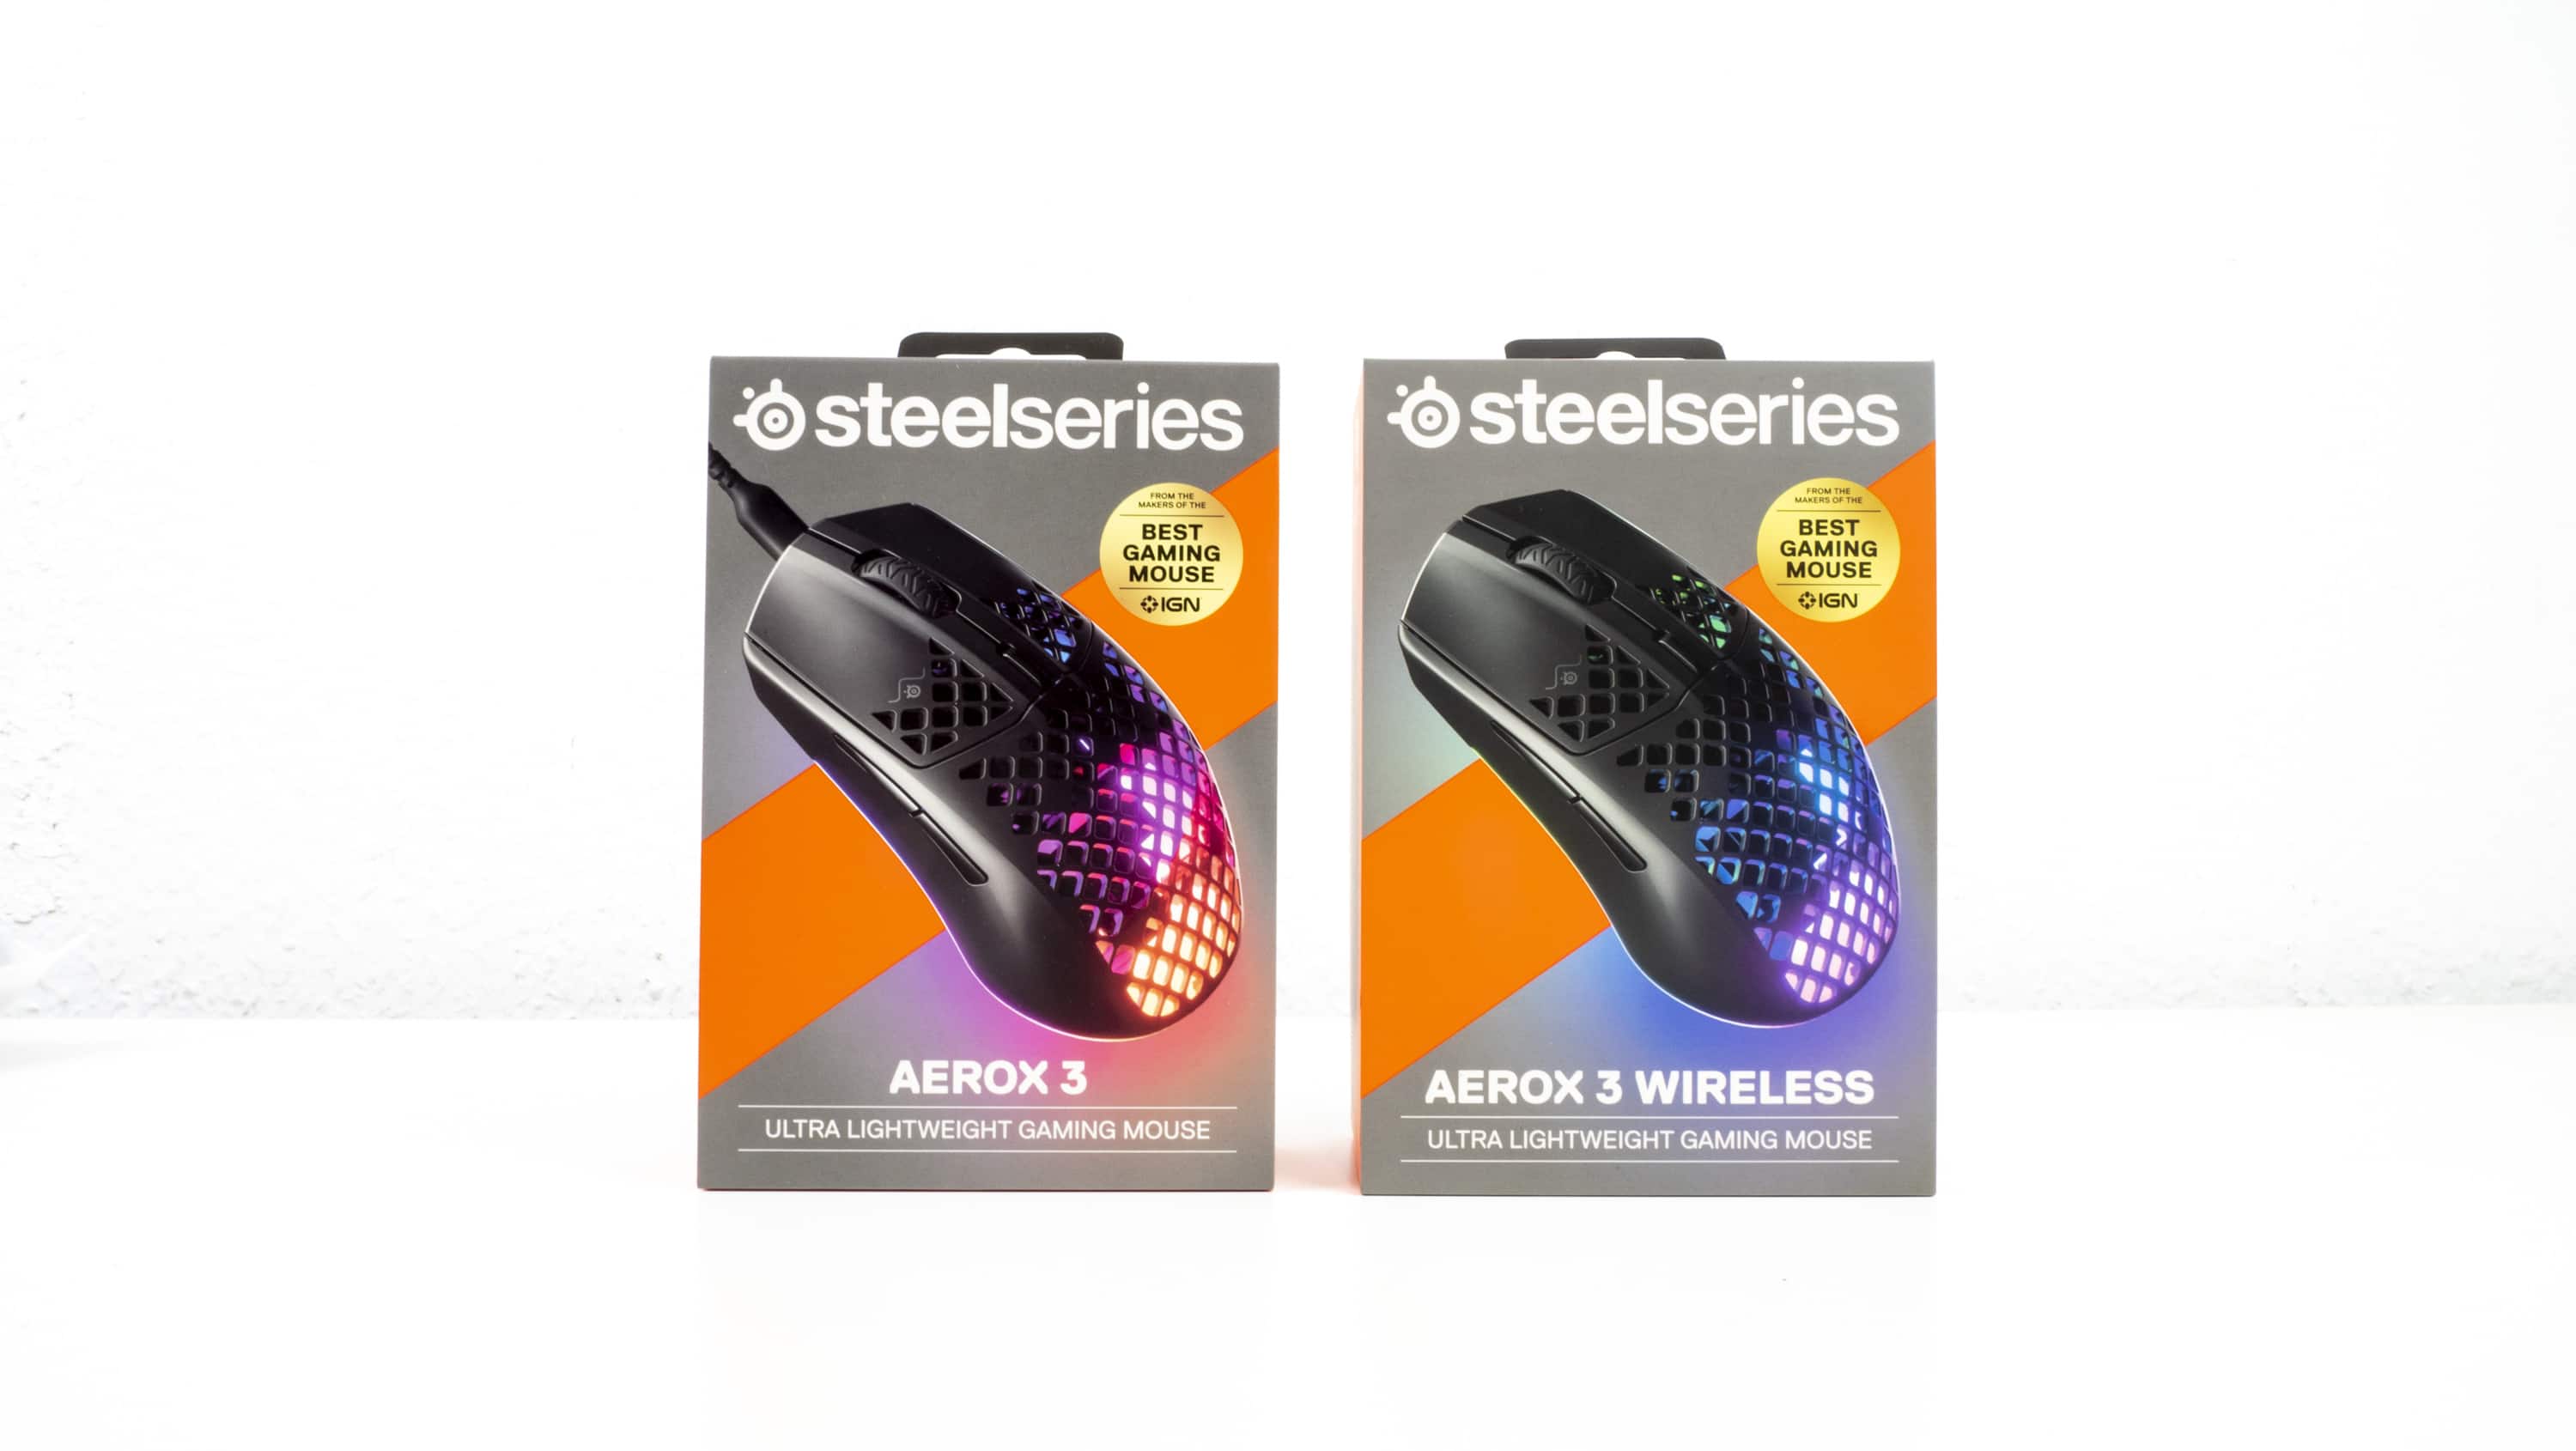 3 & 3 in Wireless SteelSeries as a Aerox feather Aerox light test: (Almost)